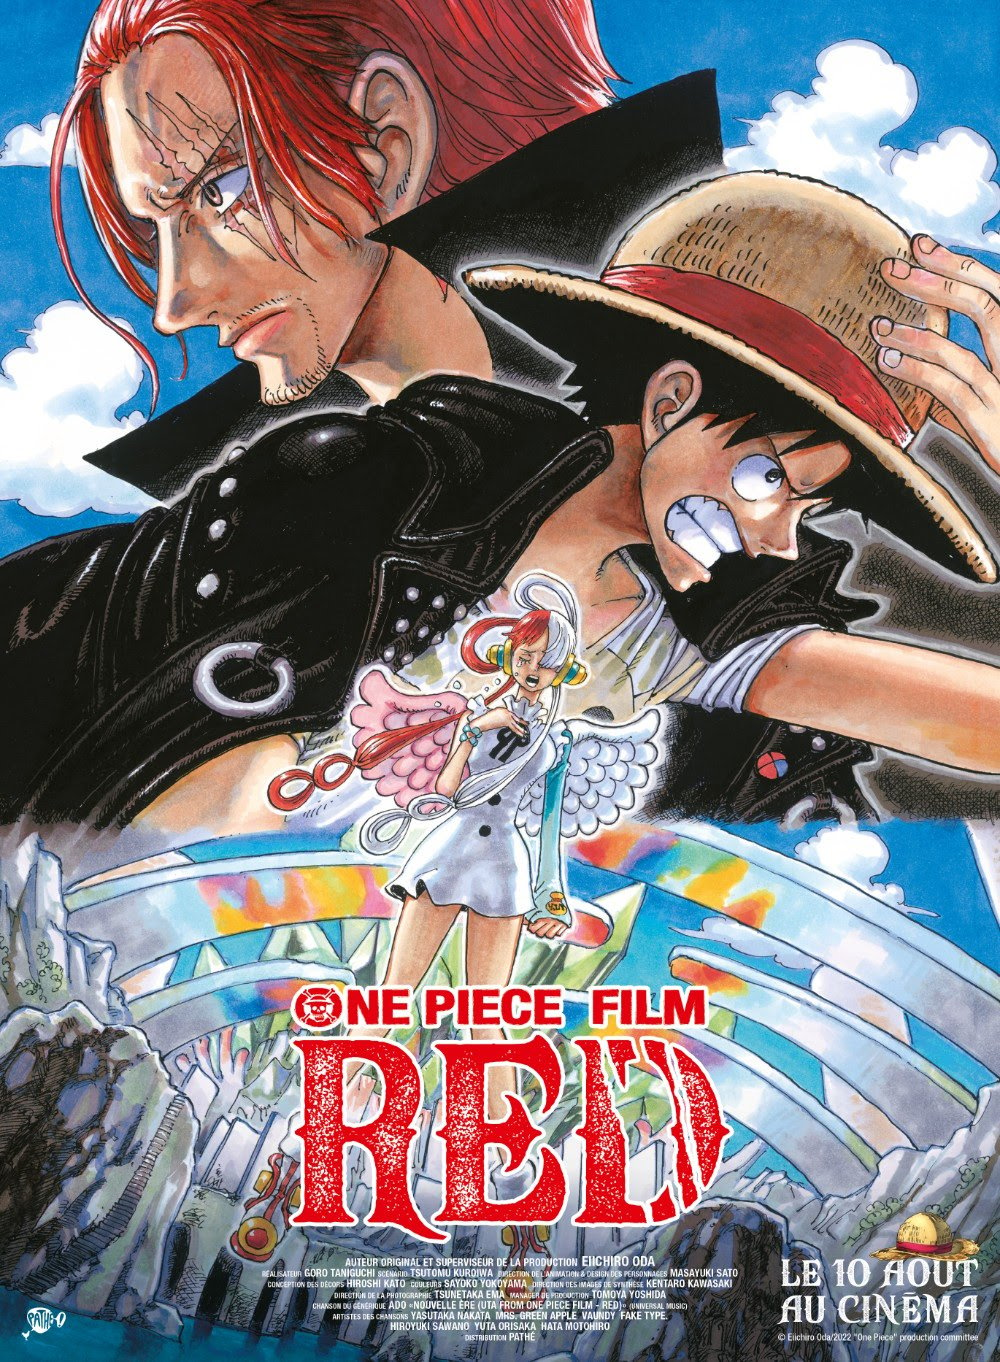 Quand sort le film One Piece Red ?